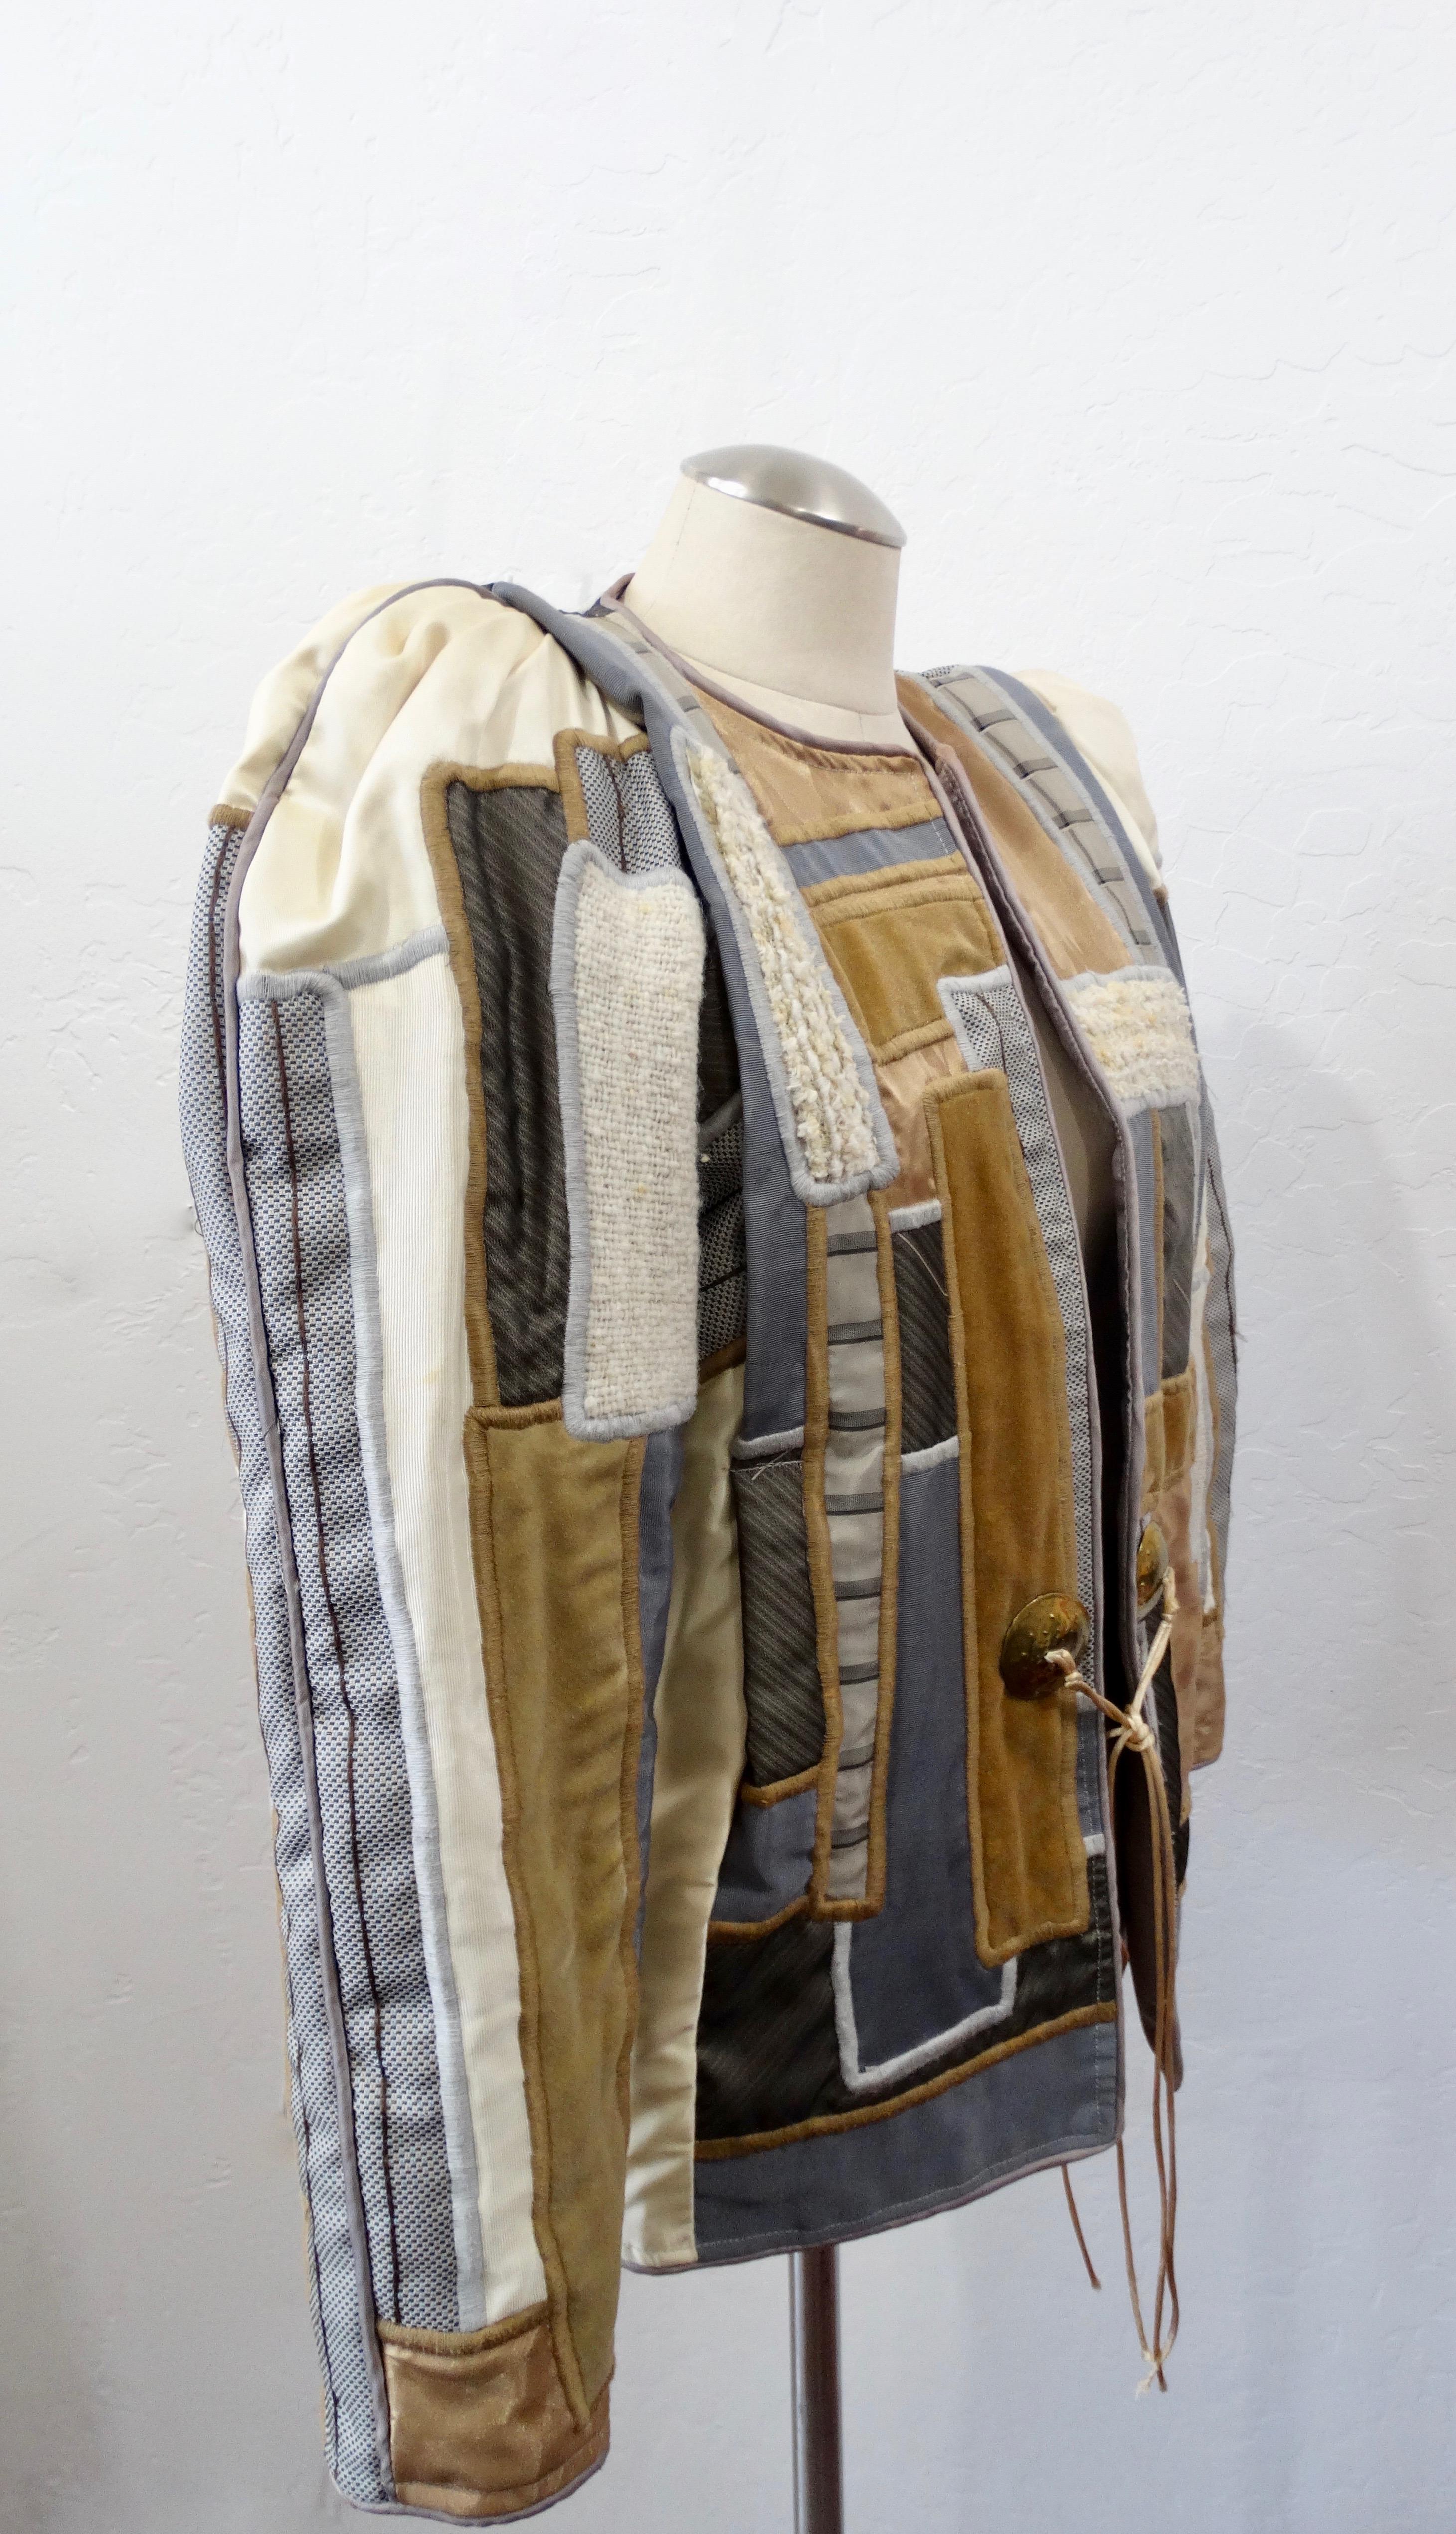 The Most Unique Jacket Is Here! Circa 1980s, this Judith Roberts jacket features amazing appliqué patchwork made up of abstract designs in a mixture of soft colors and a variety of beautiful textured fabrics. Includes large gold toned buttons with